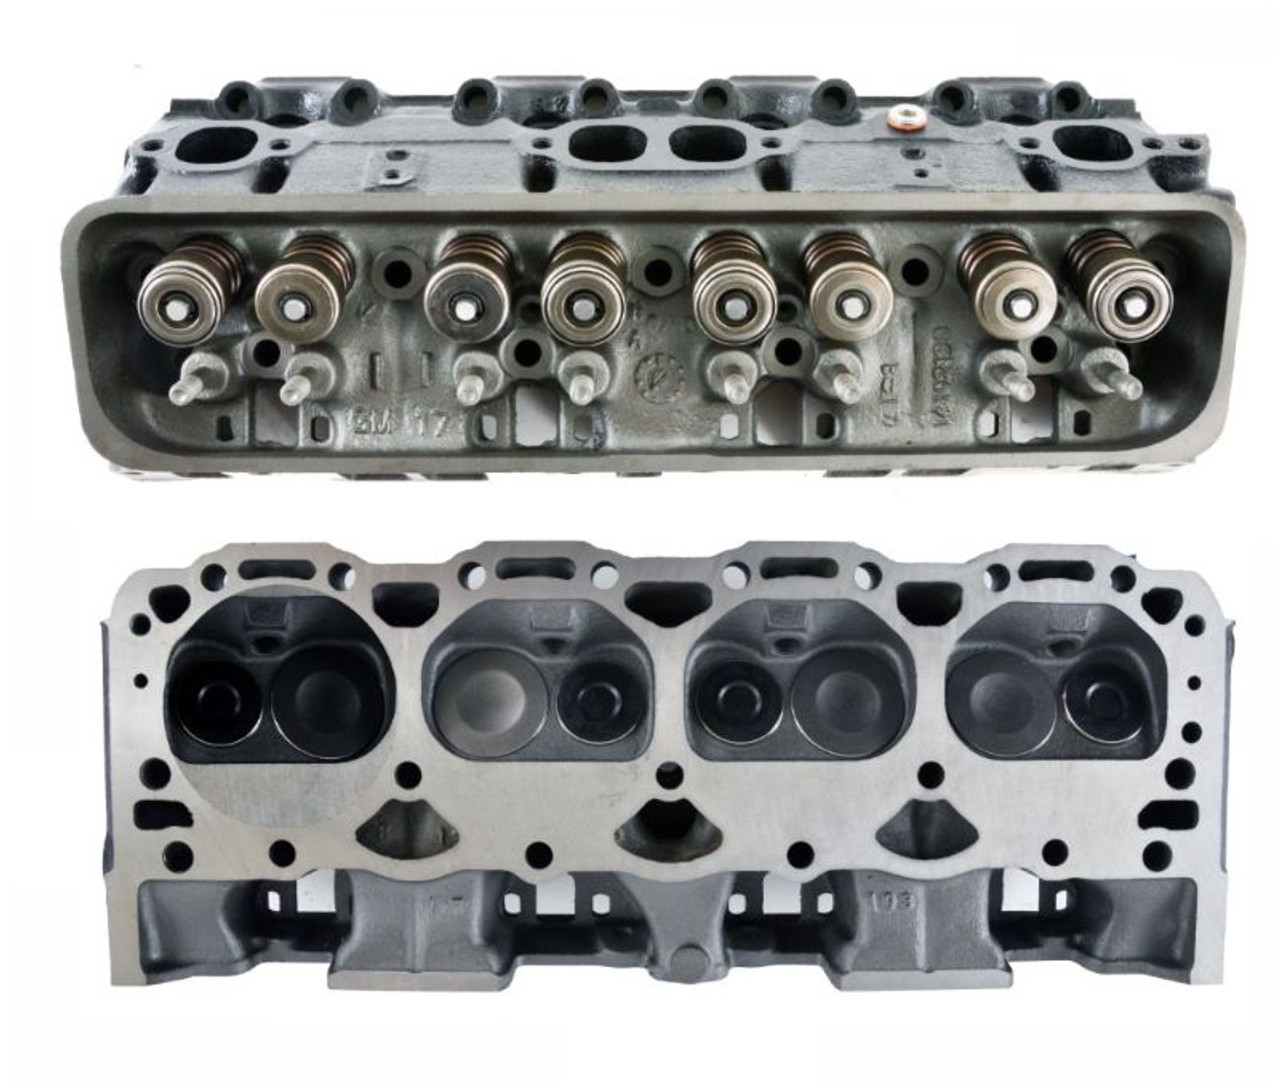 Cylinder Head Assembly - 1991 Chevrolet C1500 5.7L (CH1064R.K145)